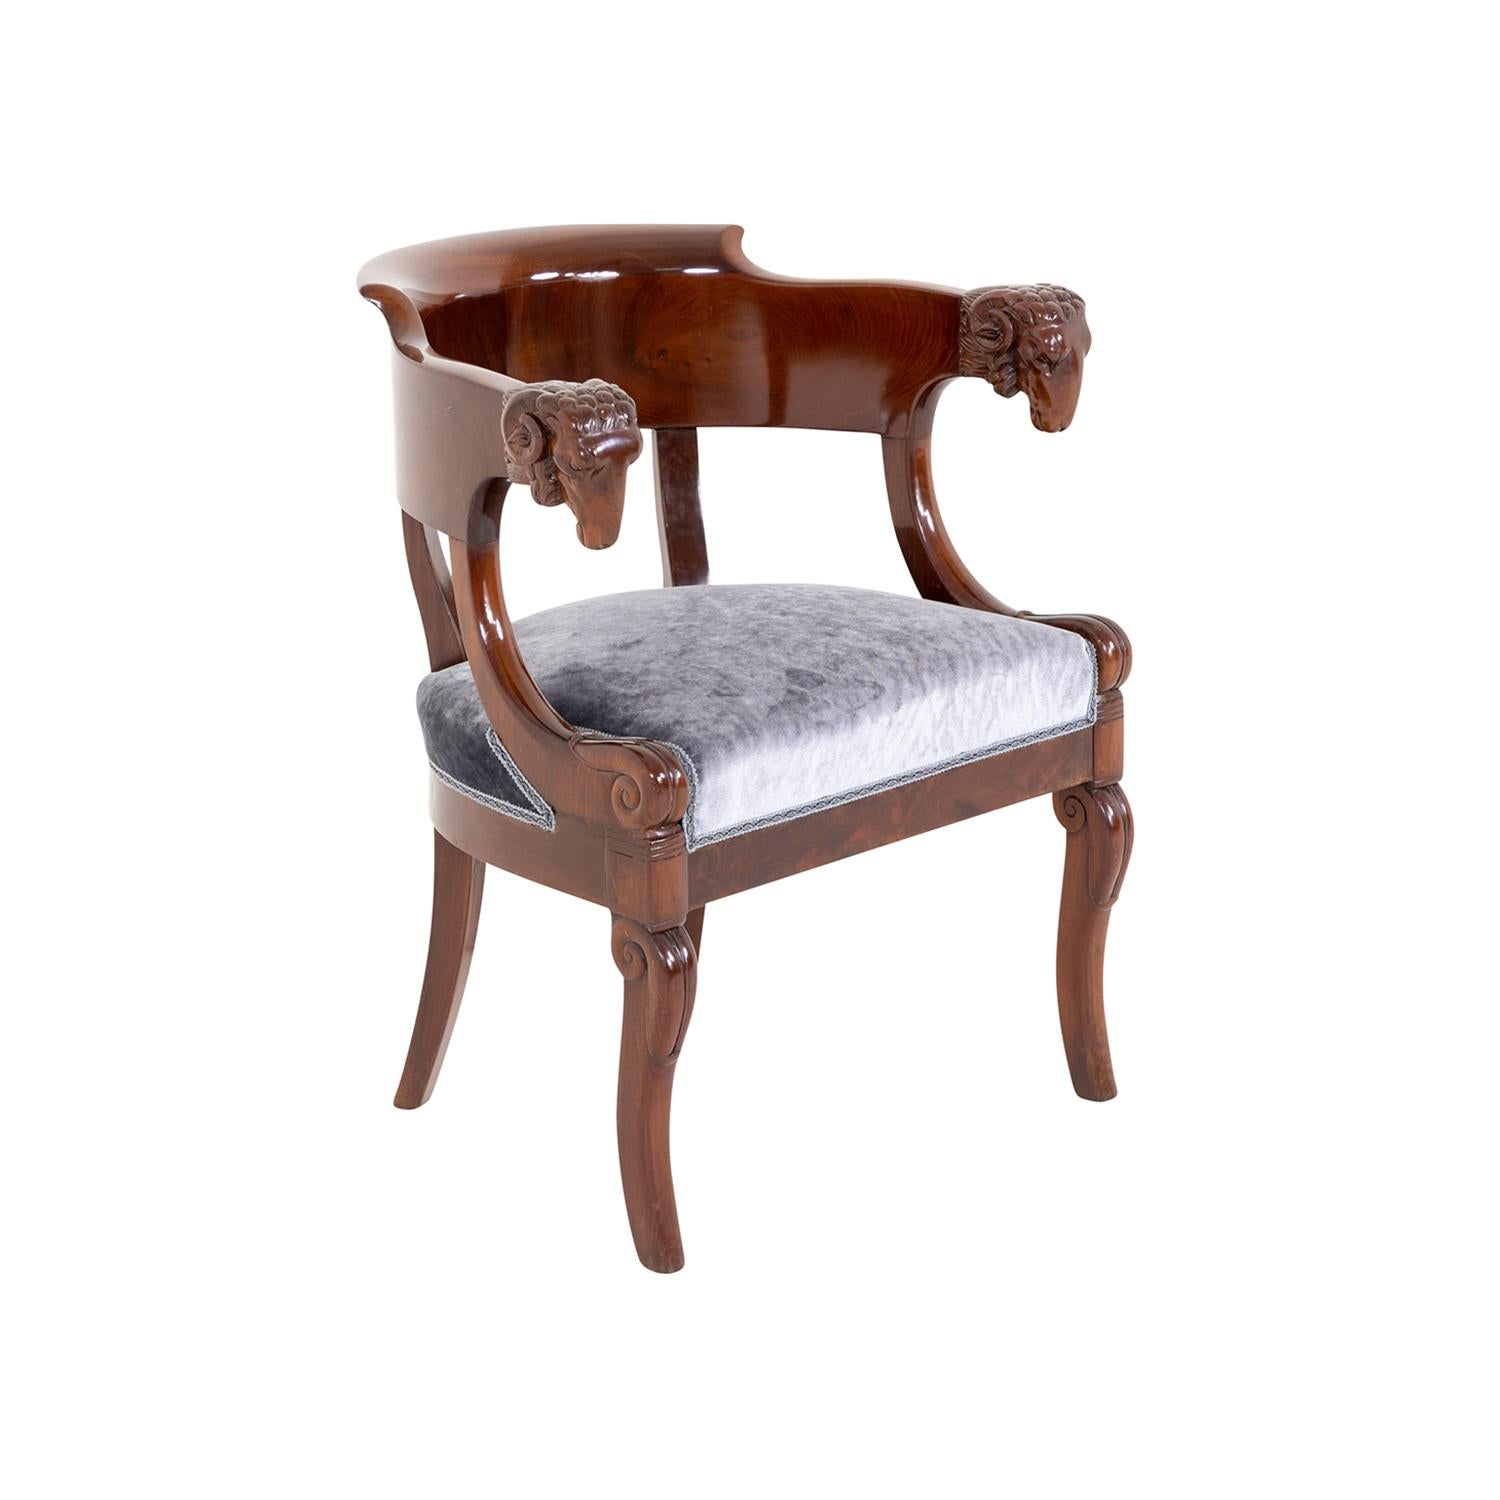 A dark-brown, antique German Biedermeier single armchair made of hand shellac polished Mahogany, in good condition. The detailed side chair has a half round, arched backrest with slim armrests which are particularized with rams heads. The corner